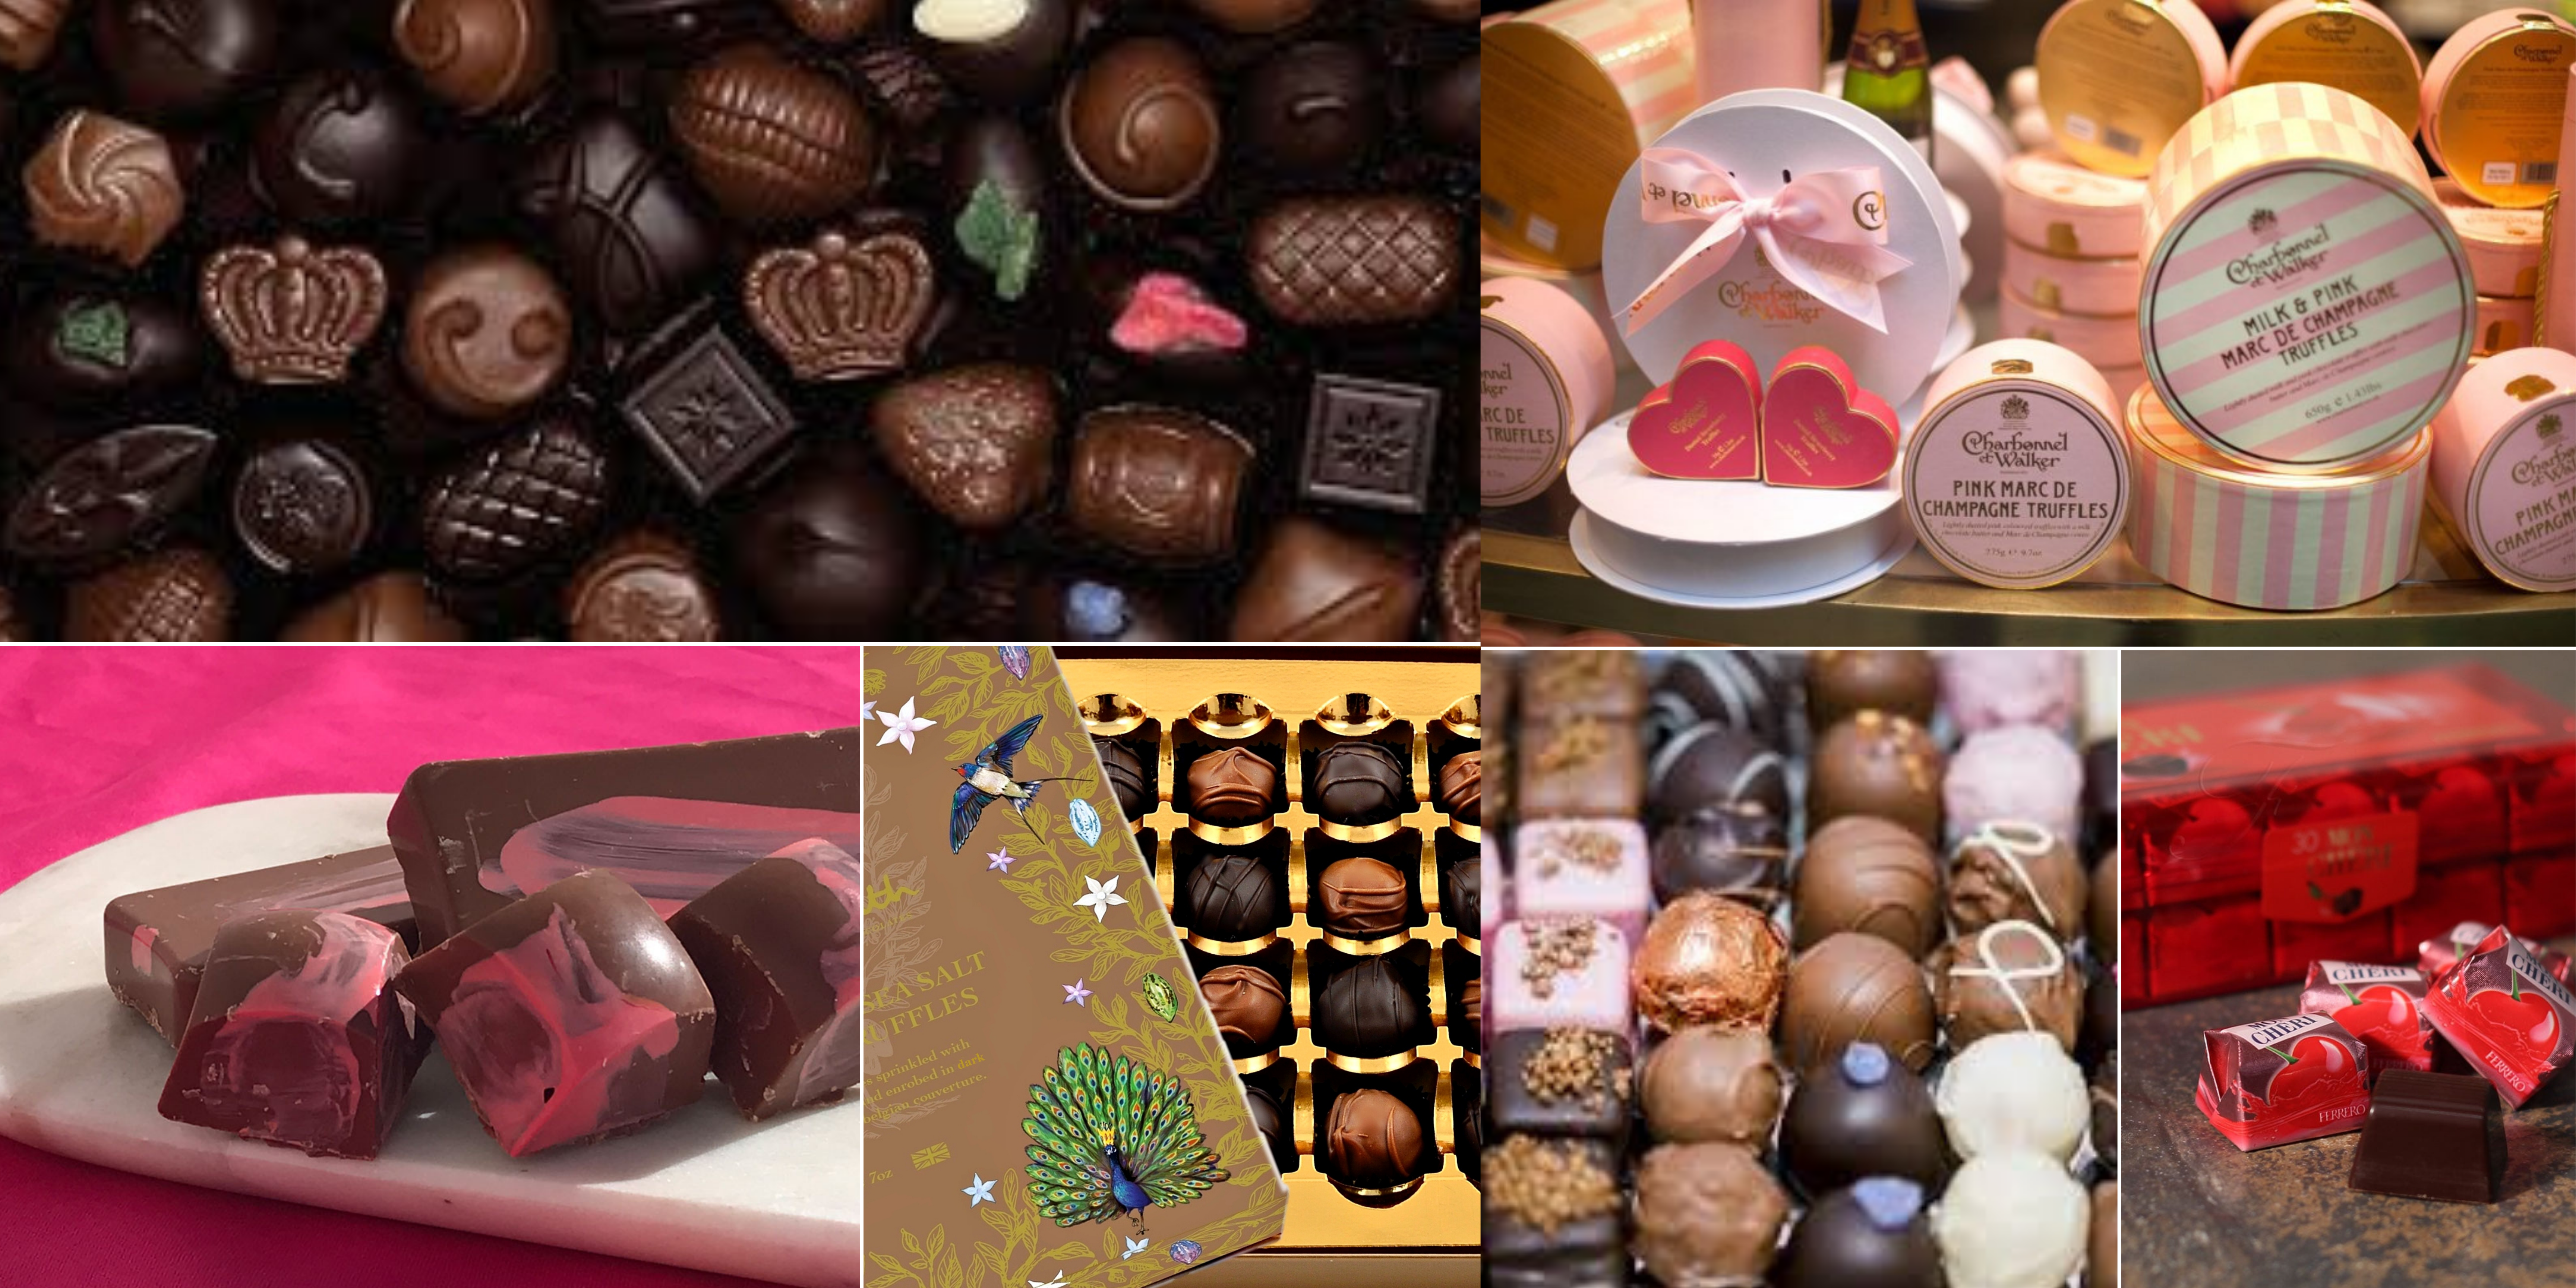 Say it with Chocolate! Valentine’s Day 2021